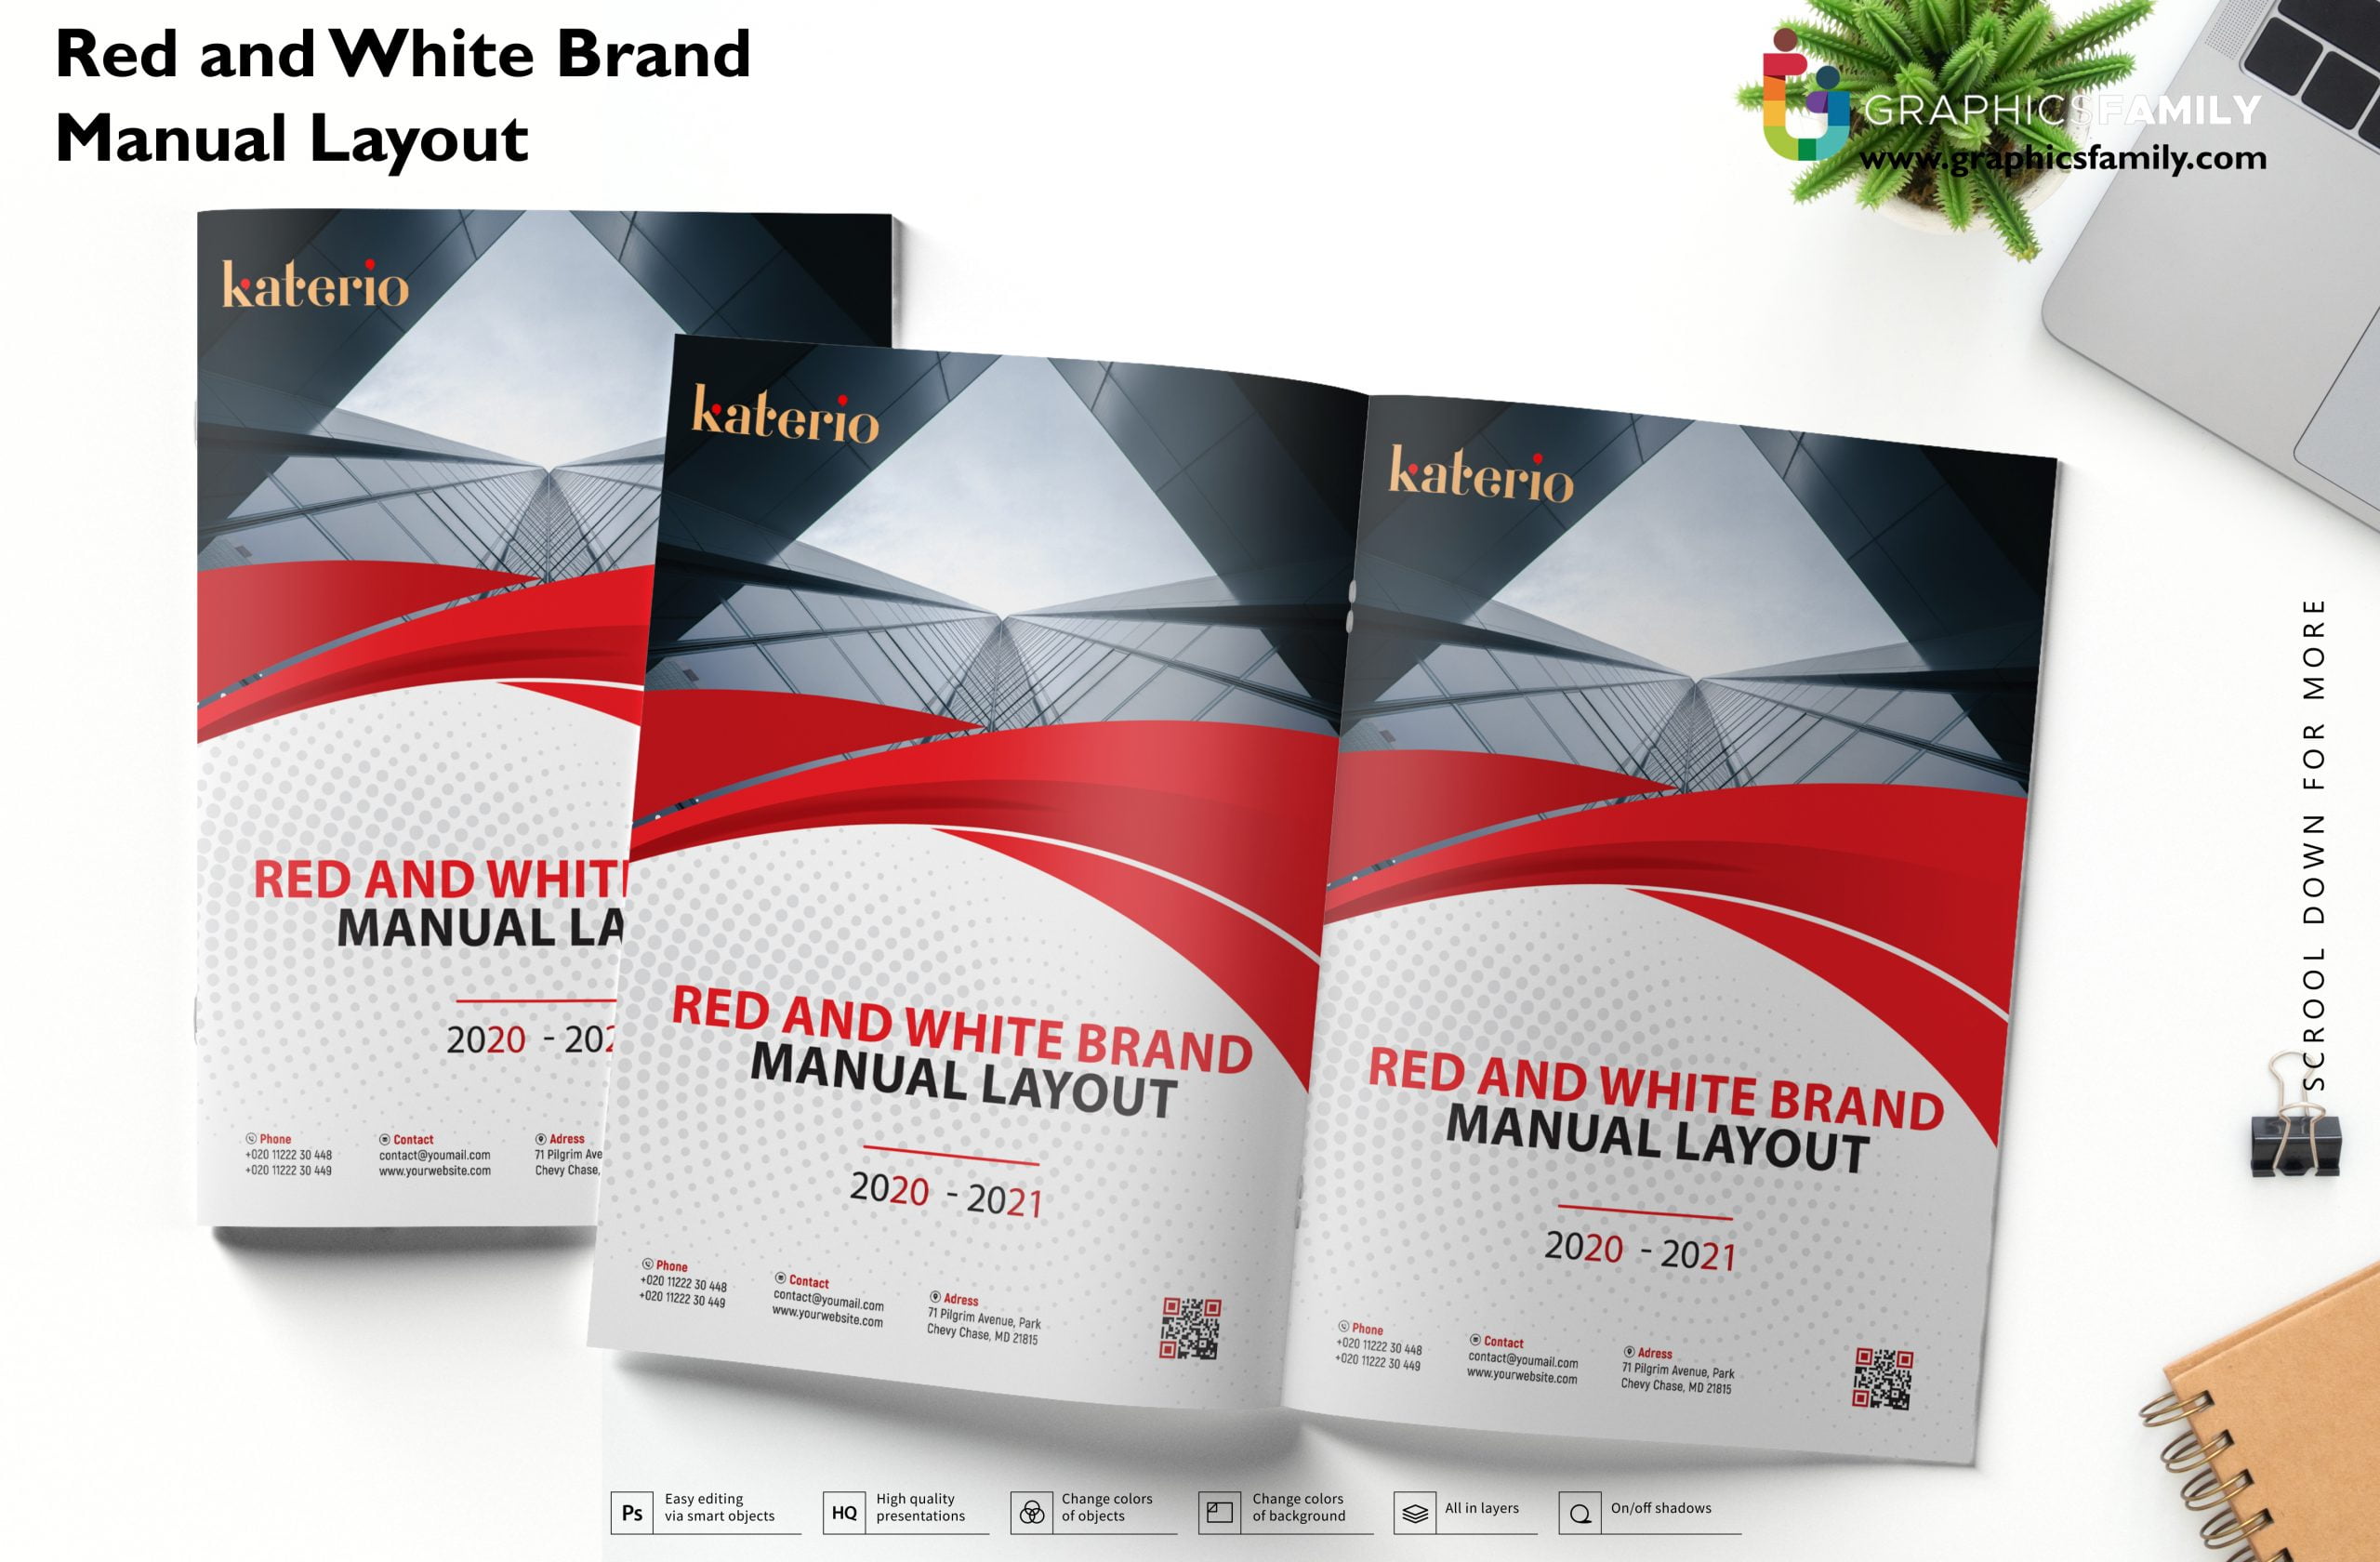 Red and White Brand Manual Layout